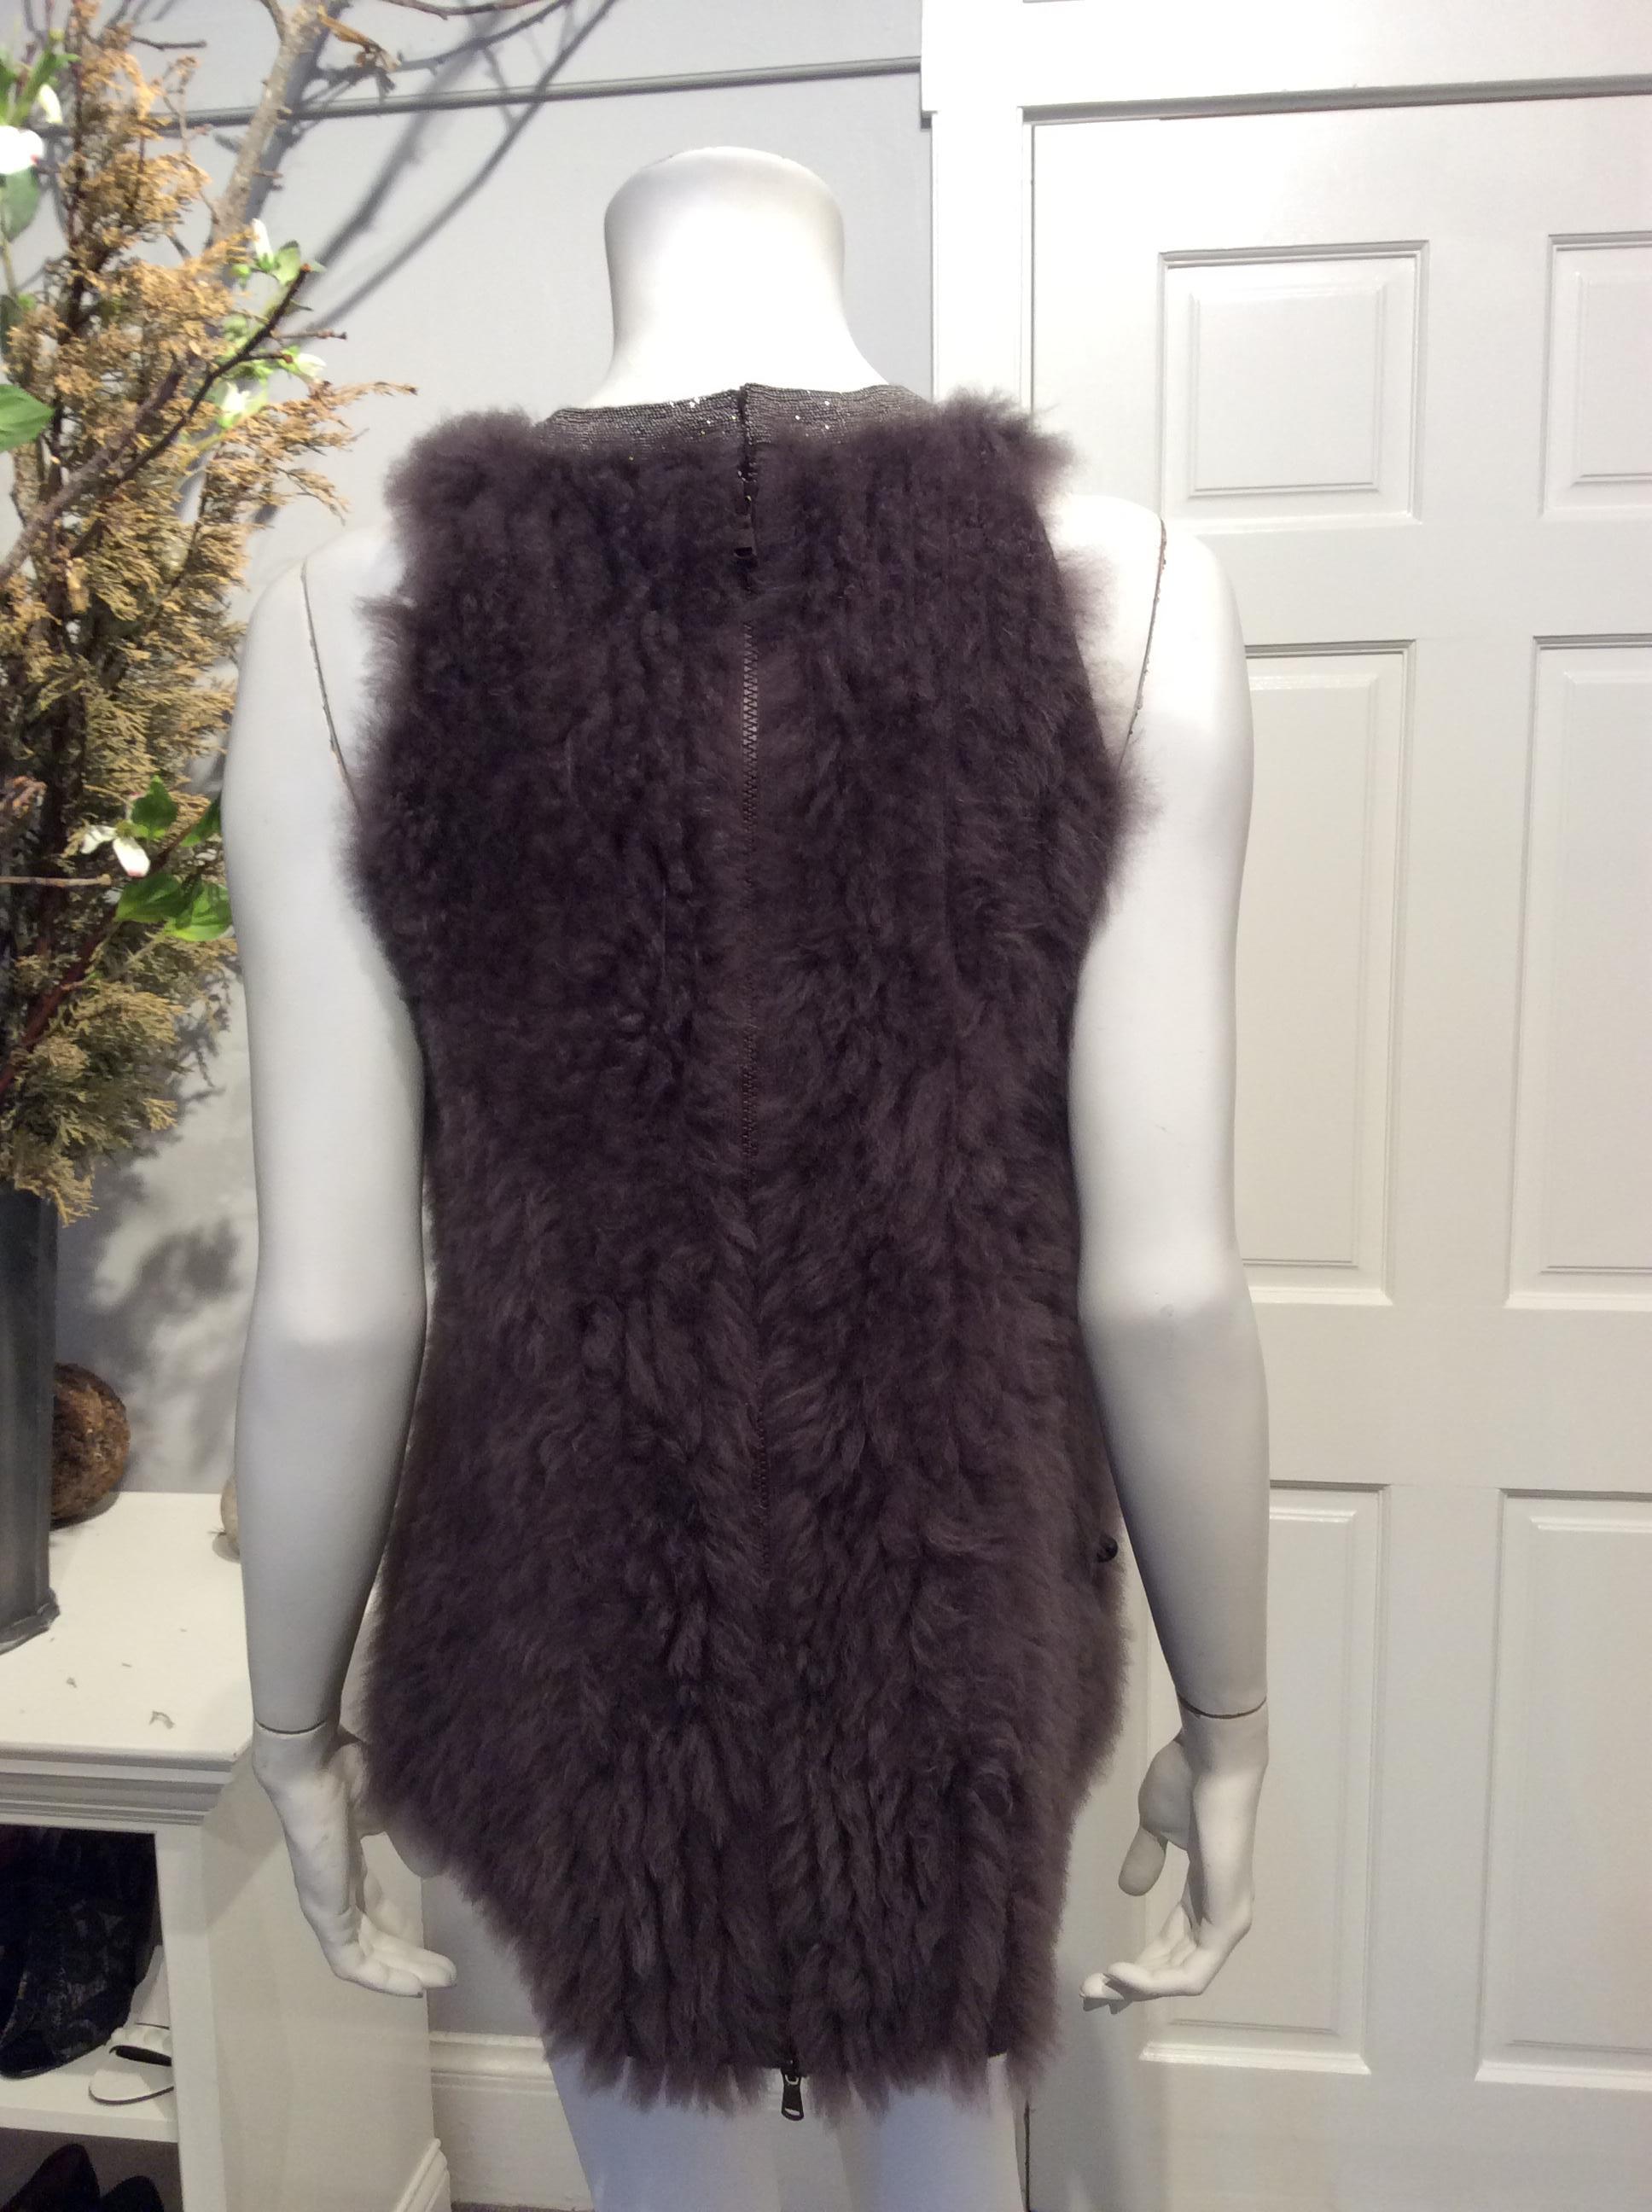 Brunello Cucinelli dark taupe cashmere with super soft cashmere goat fur “stripes” over knit top, silver monili beading at neckline. 

Hi-low cut; full-length back zipper. [Note: Symmetrical hi-low cut, though main photo makes top appear